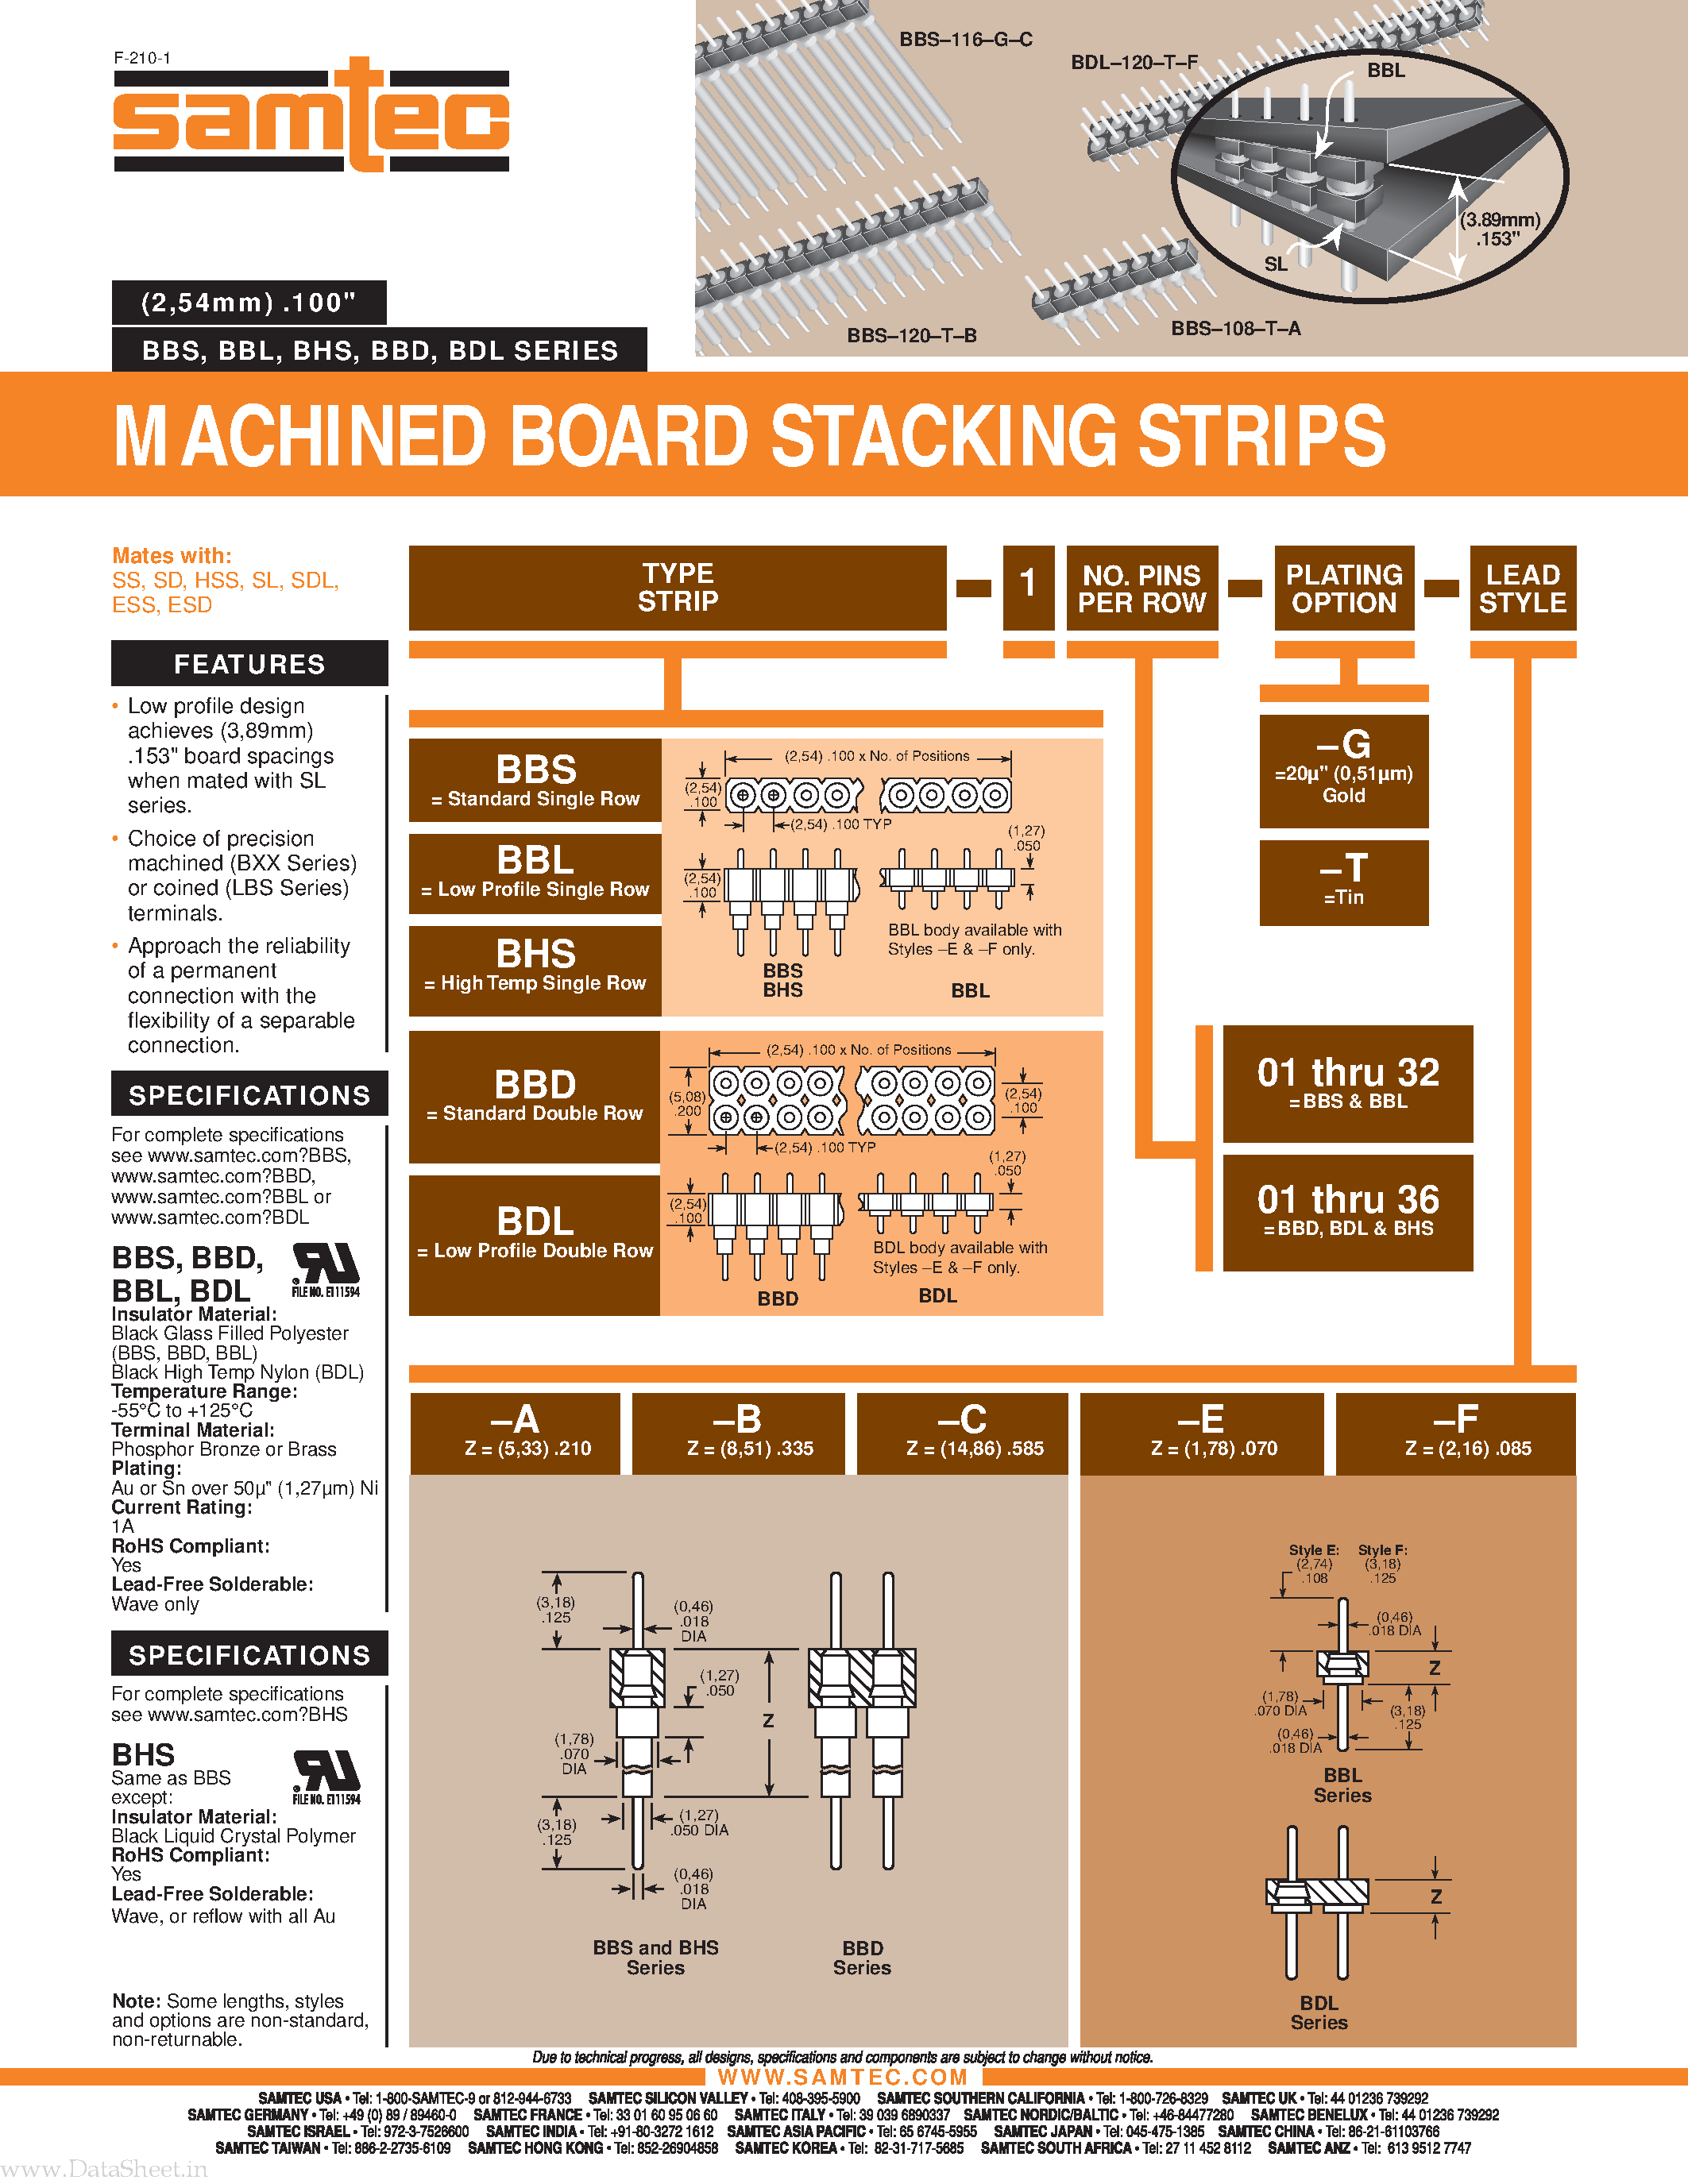 Даташит BDL-125-G-E - MACHINED BOARD STACKING STRIPS страница 1